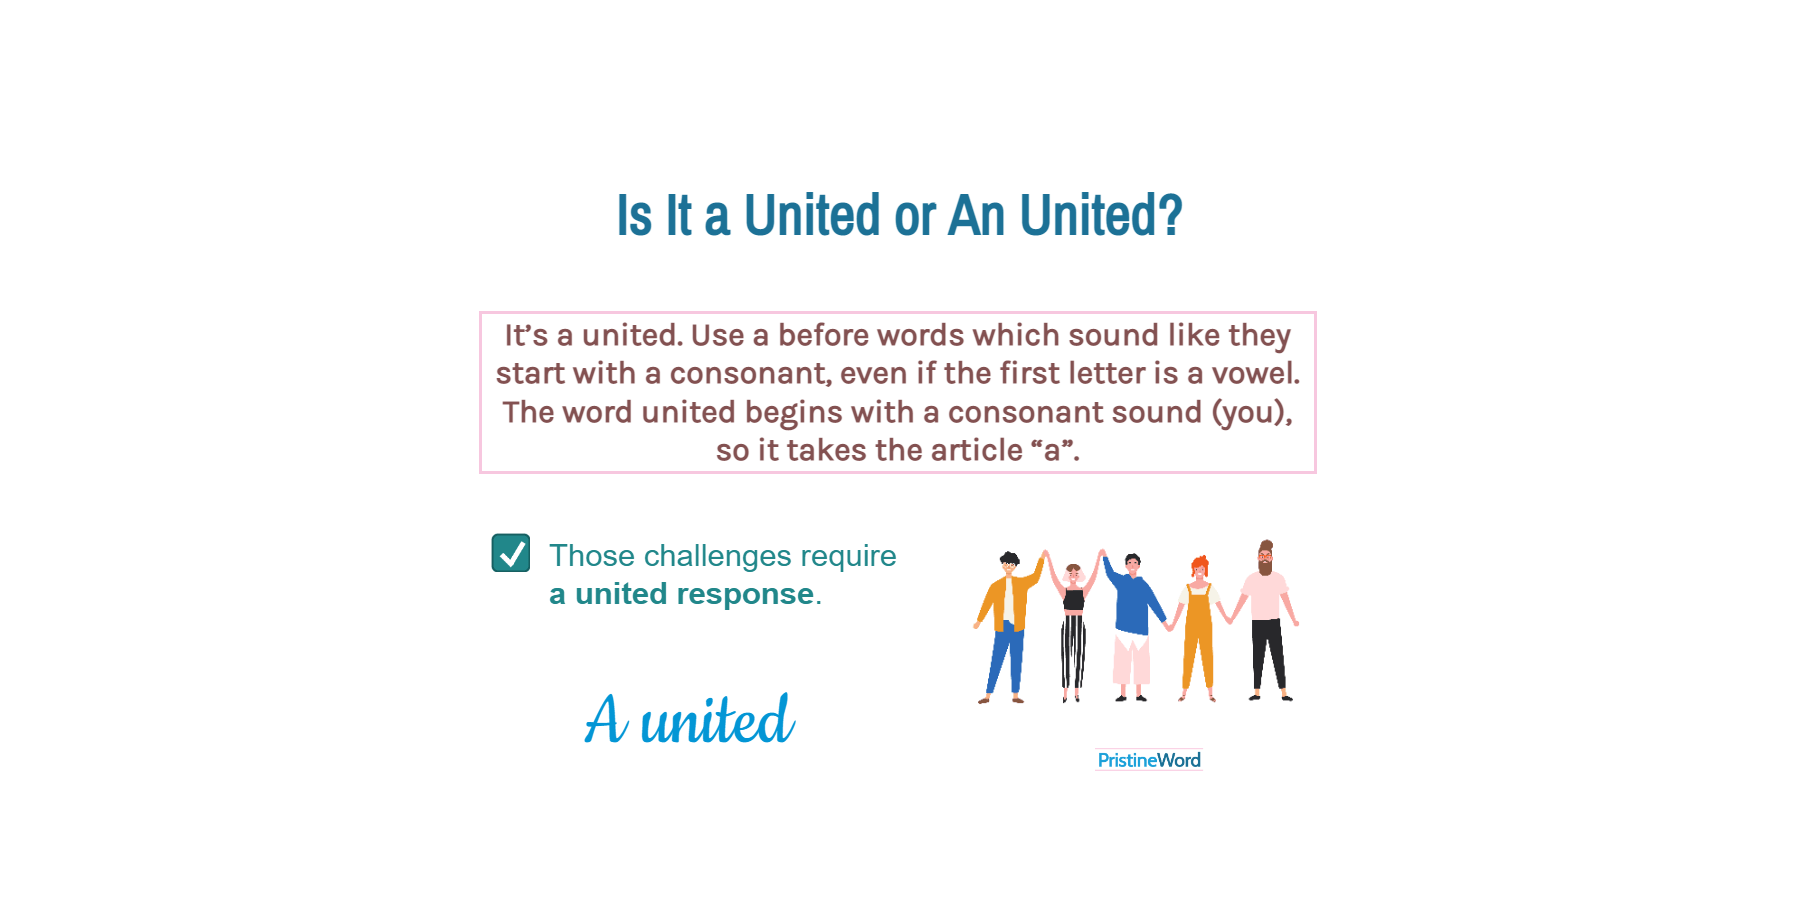 Is It a United or an United?